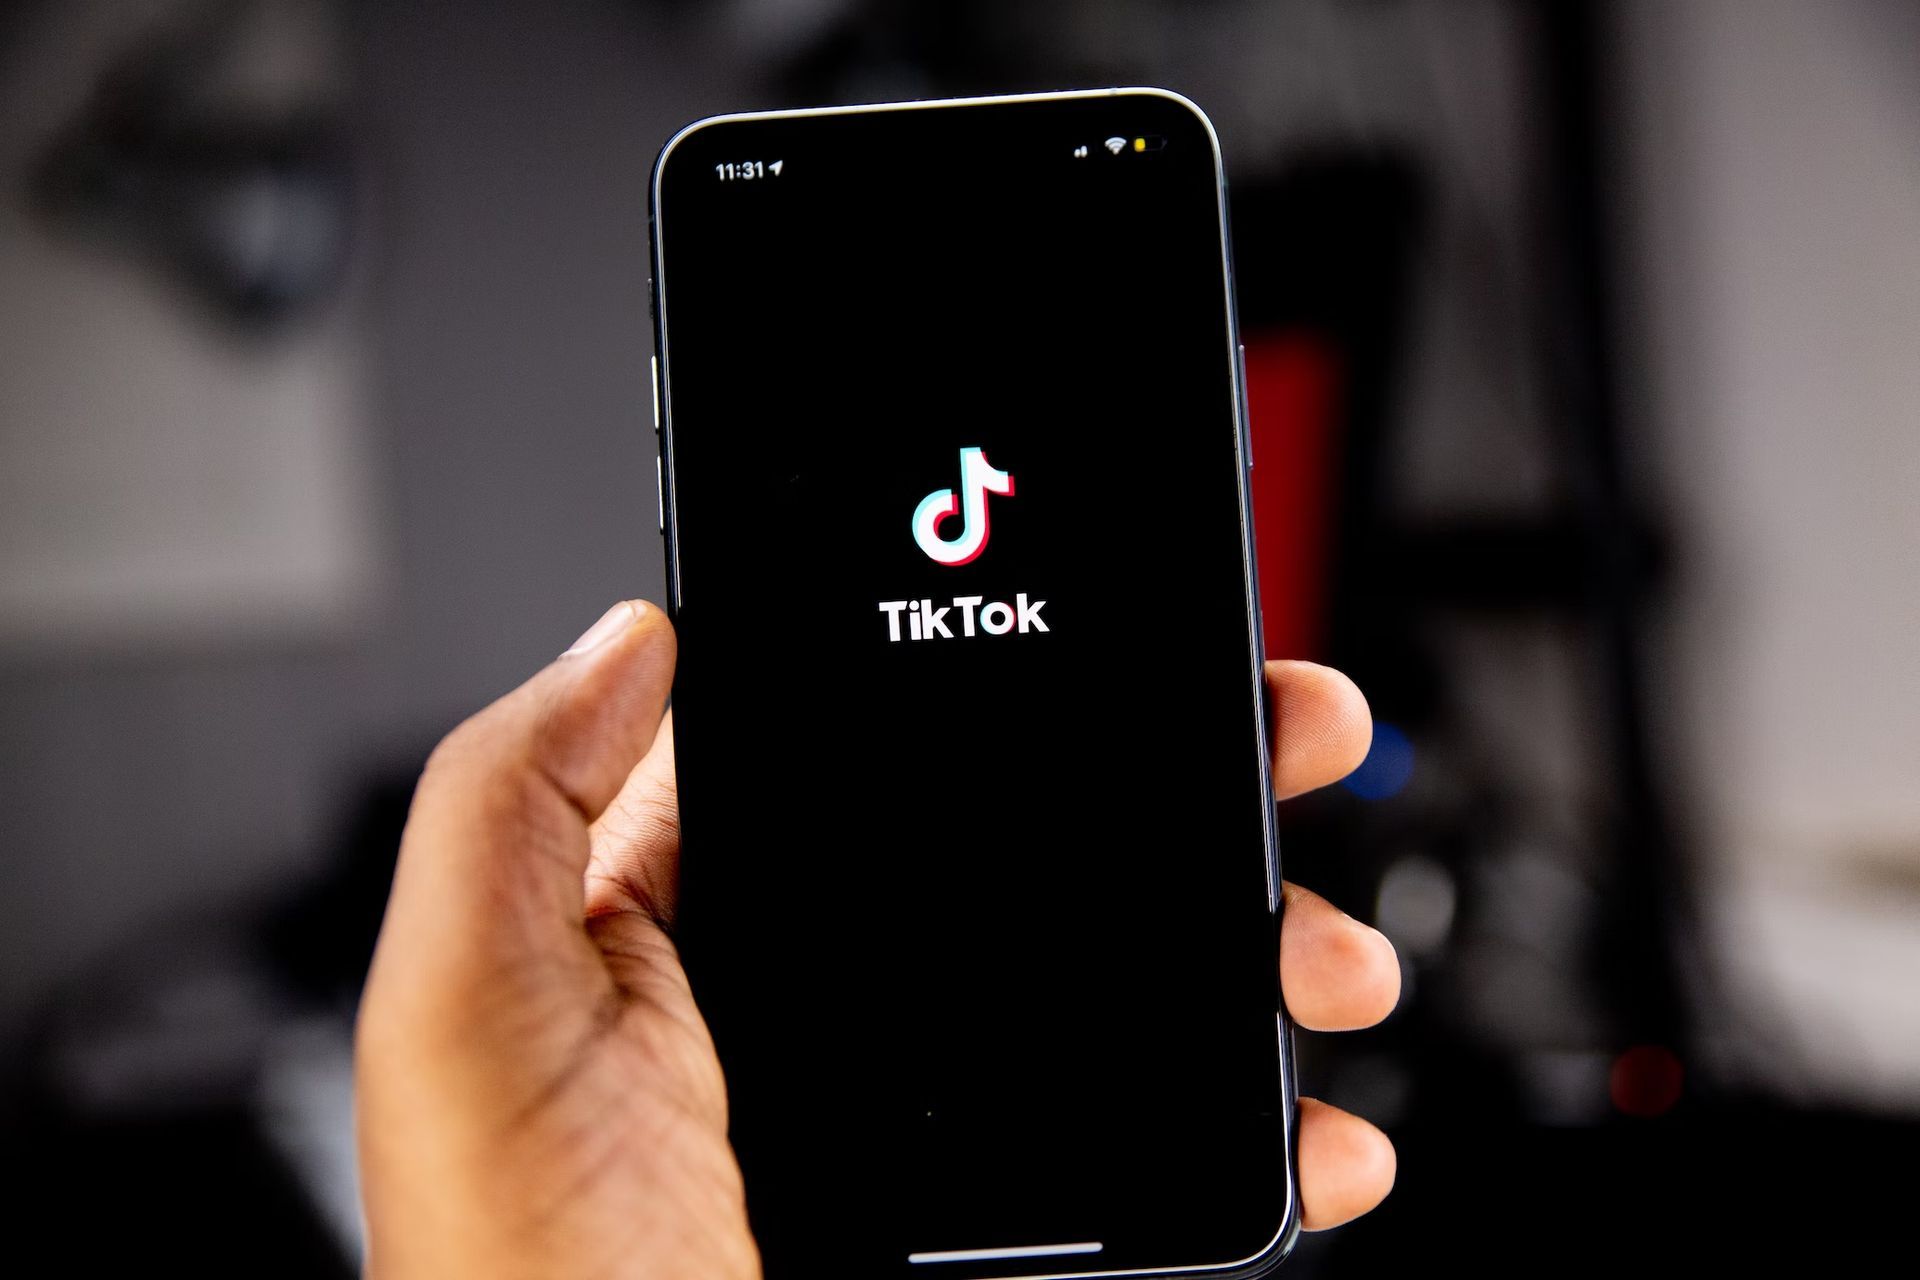 TikTok beauty filter: Before and after posts created discussions